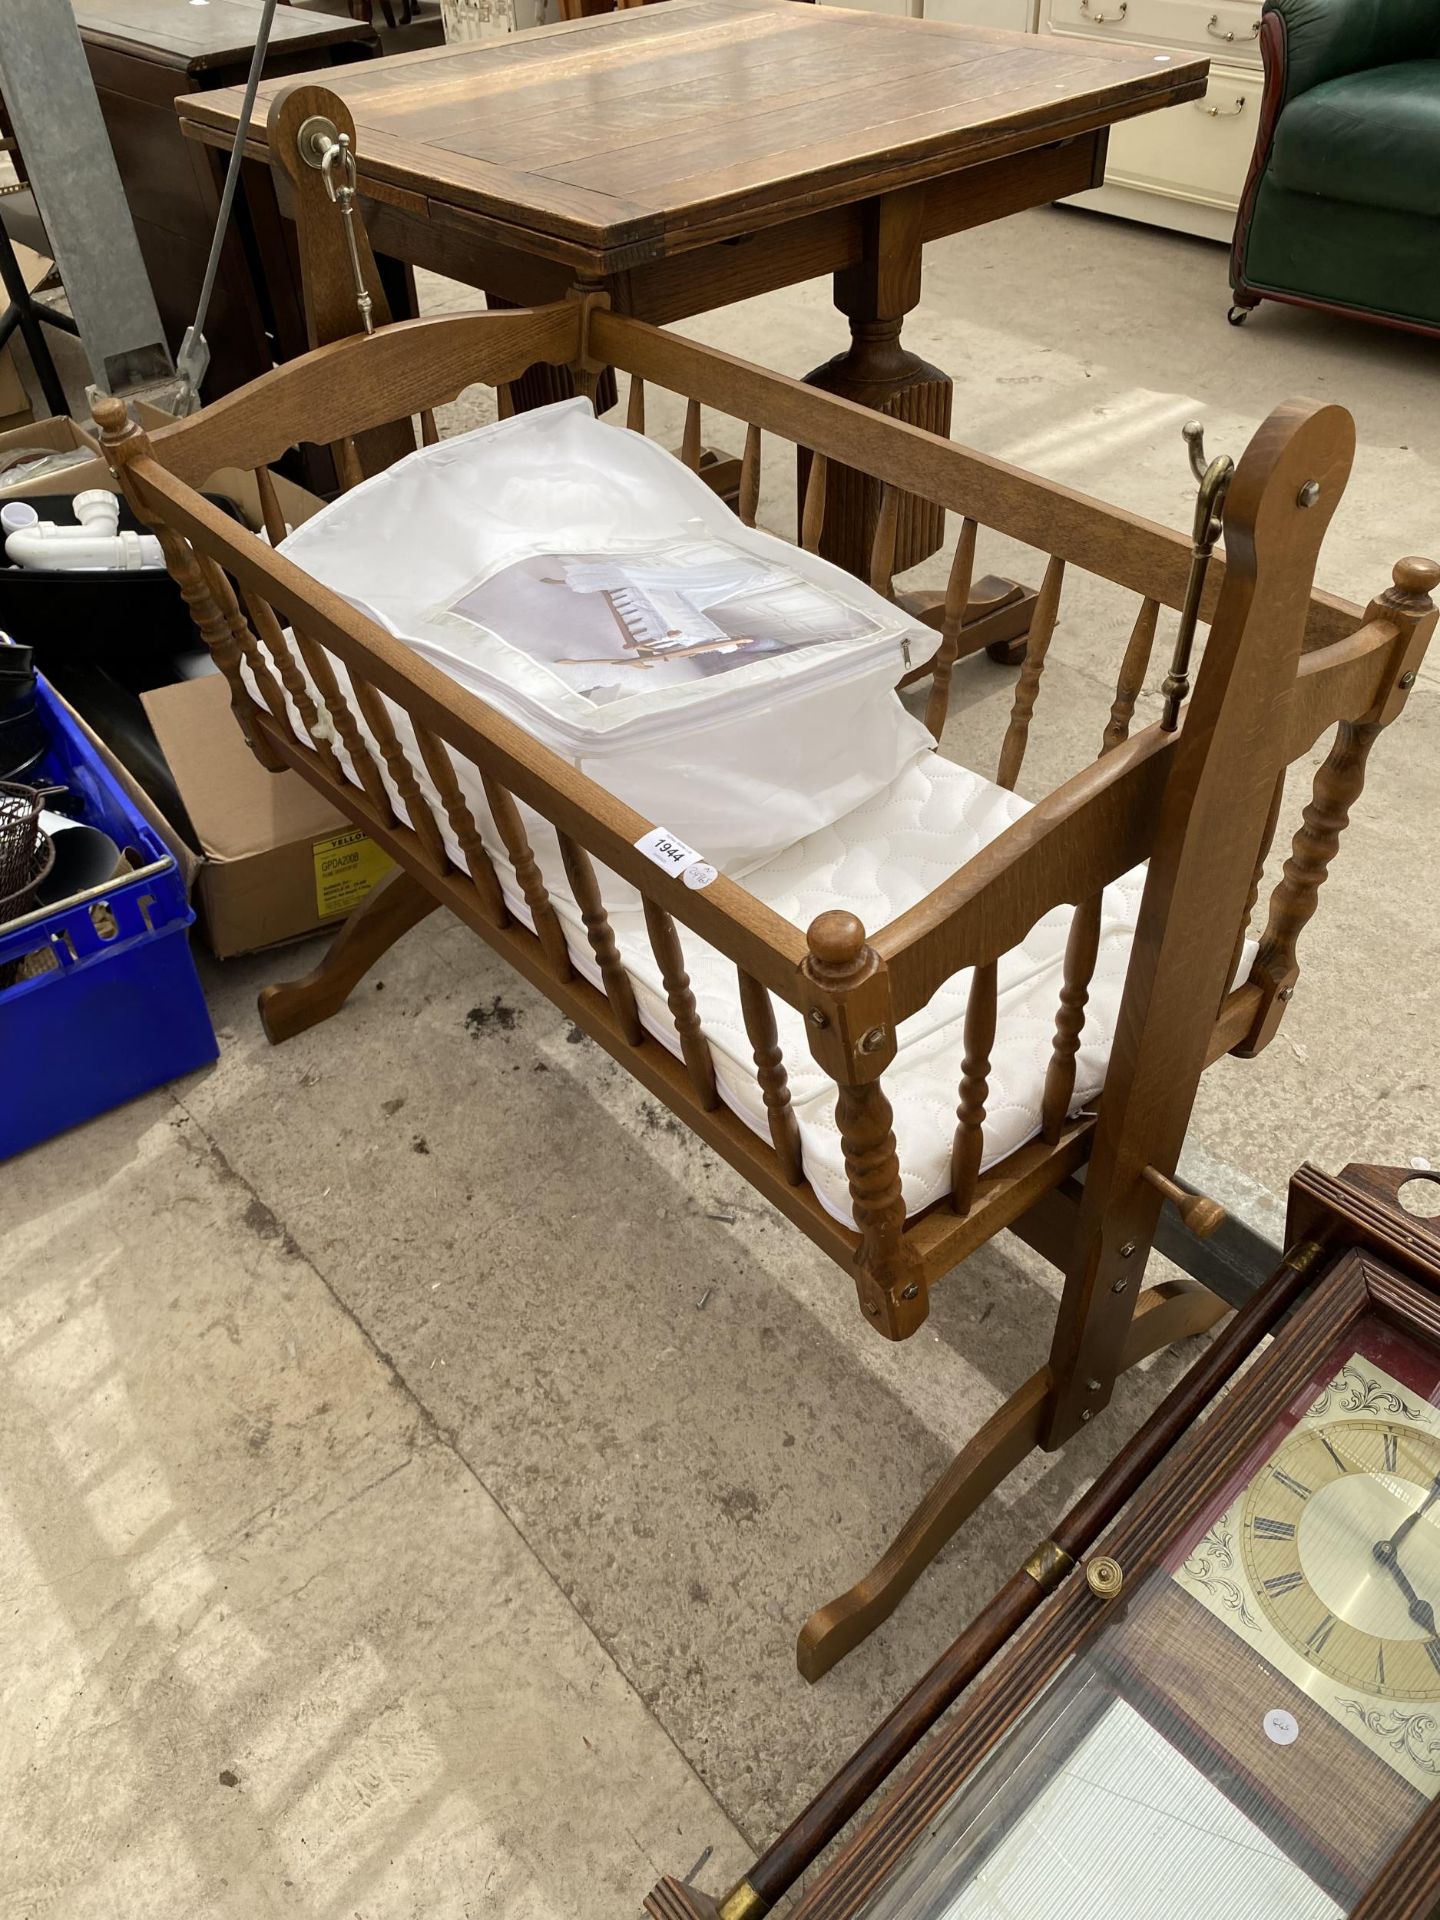 A VINTAGE STYLE WOODEN CHILD'S COT